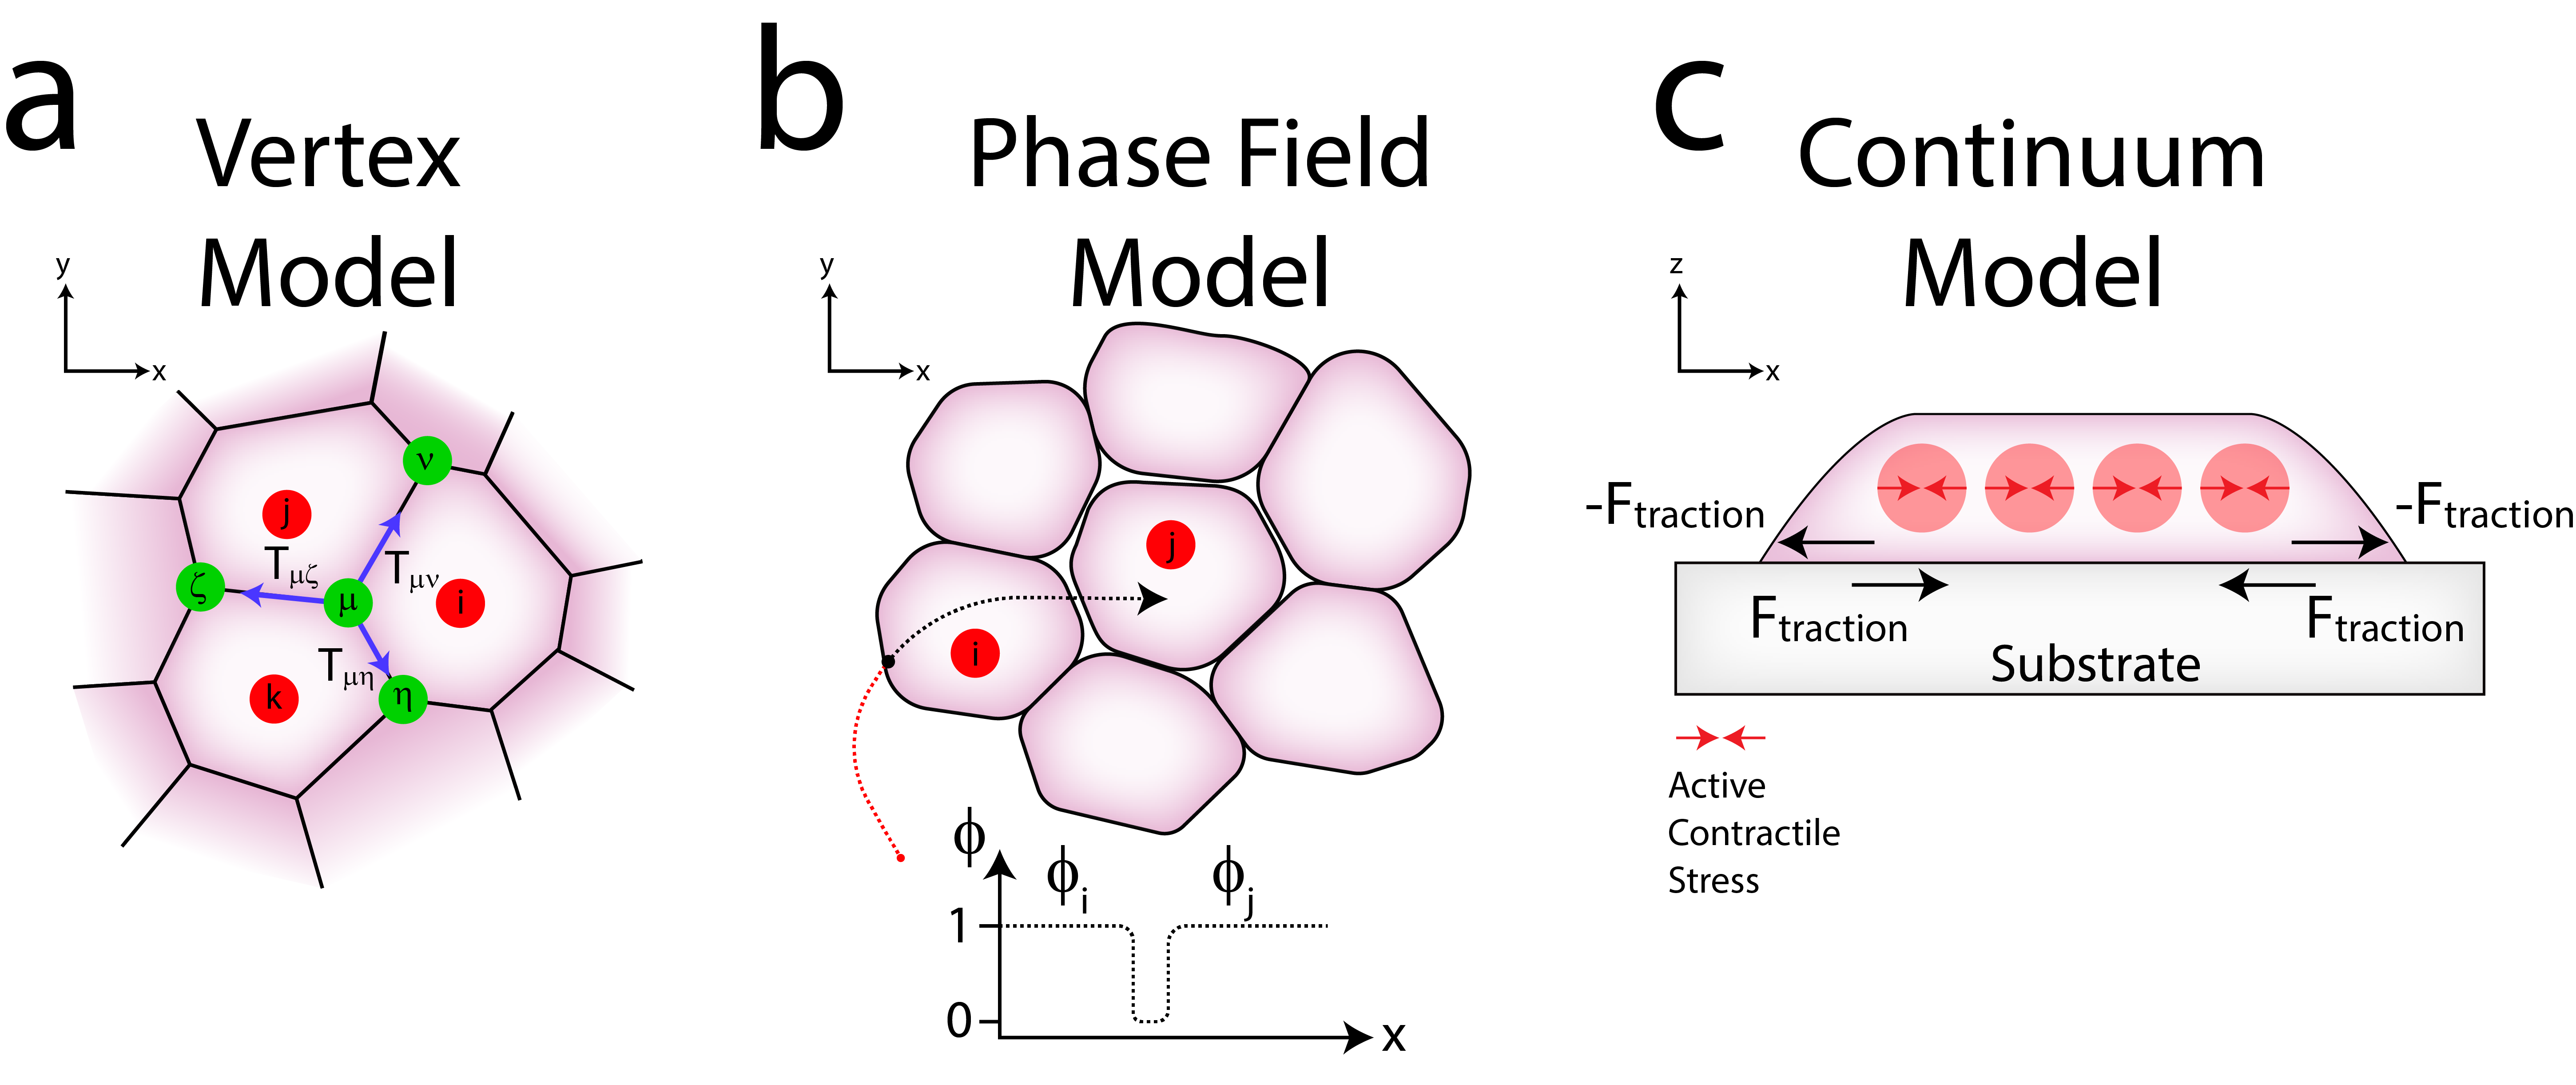 Image with three subinages, a is a sketch of vertex model, b is a sketch of the phase field model and c is a sketch of continuum model.